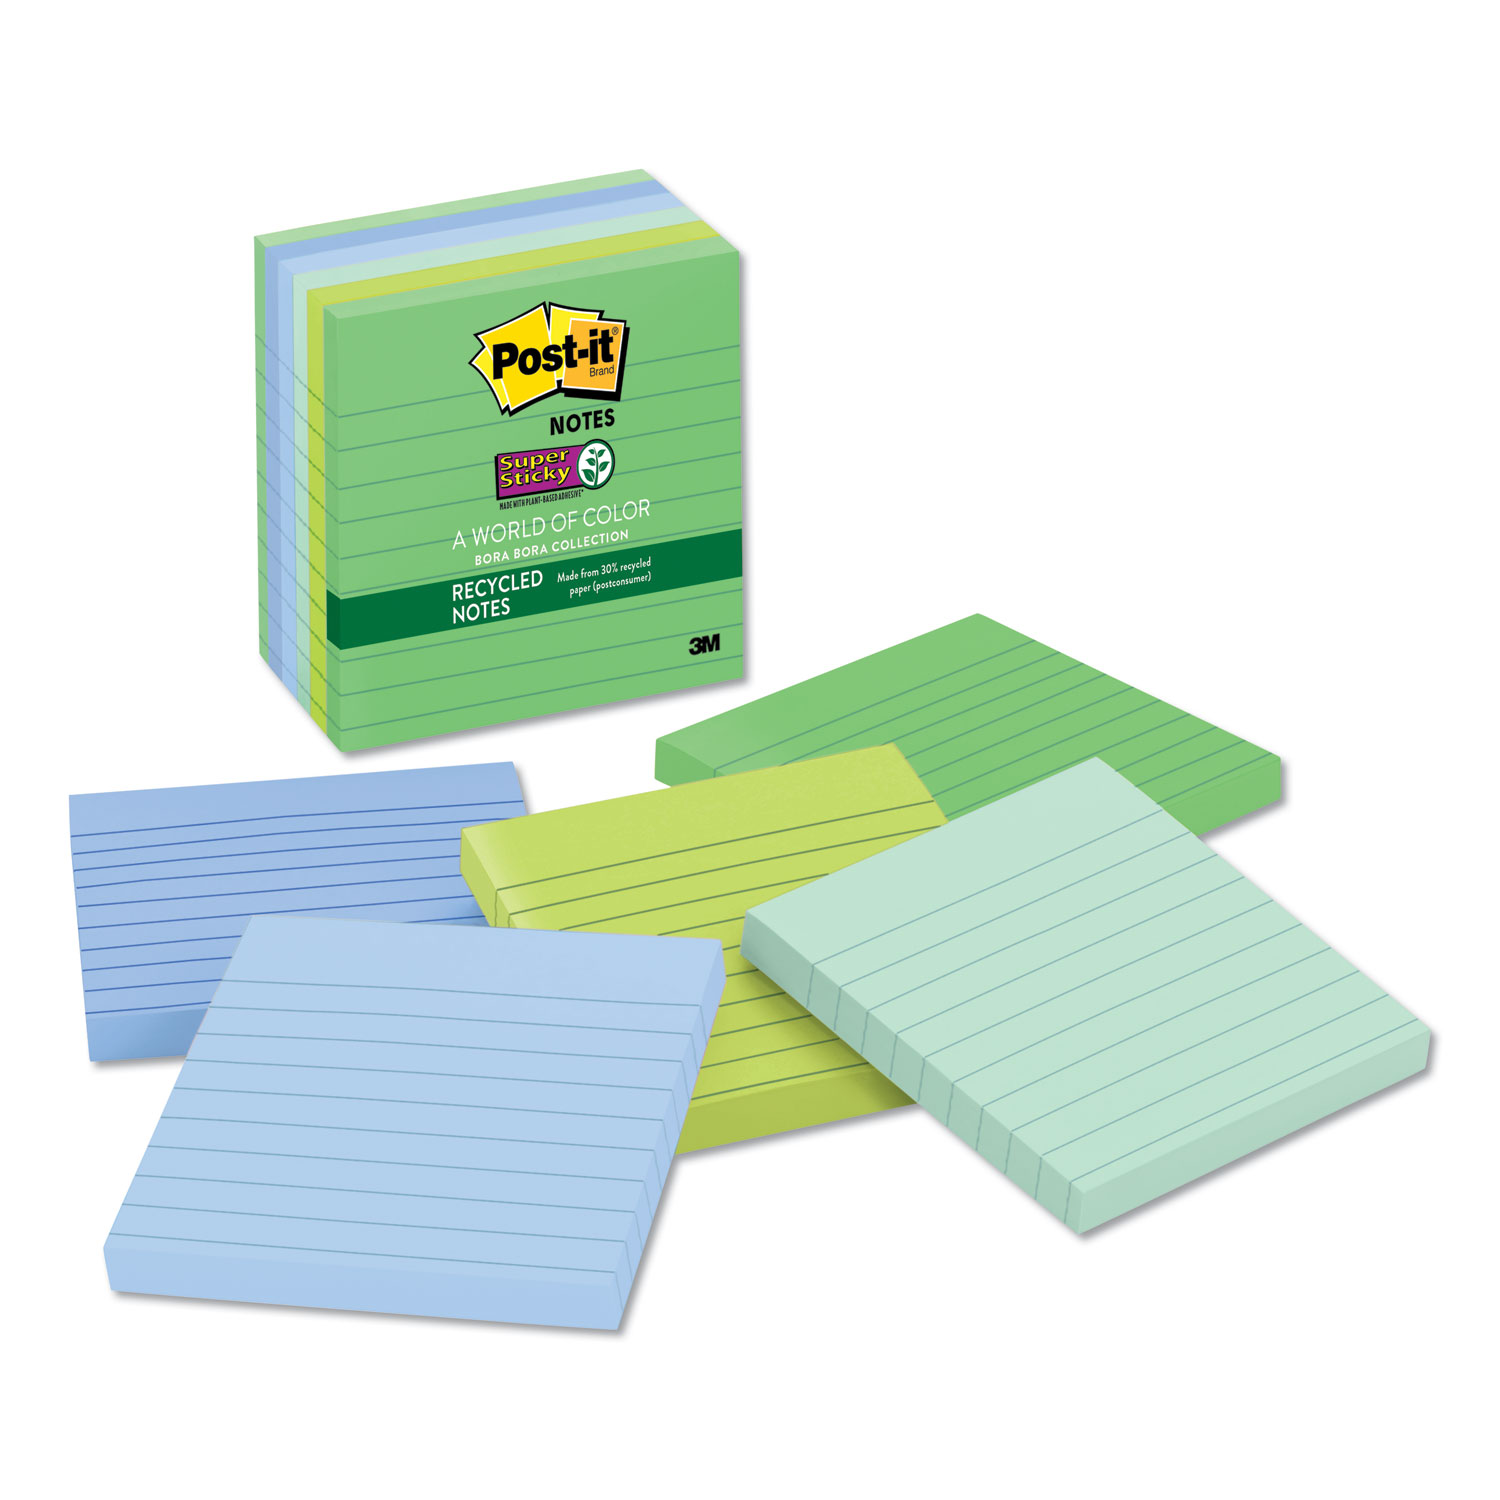  Post-it Notes Super Sticky 675-6SST Recycled Notes in Bora Bora Colors, Lined, 4 x 4, 90-Sheet, 6/Pack (MMM6756SST) 